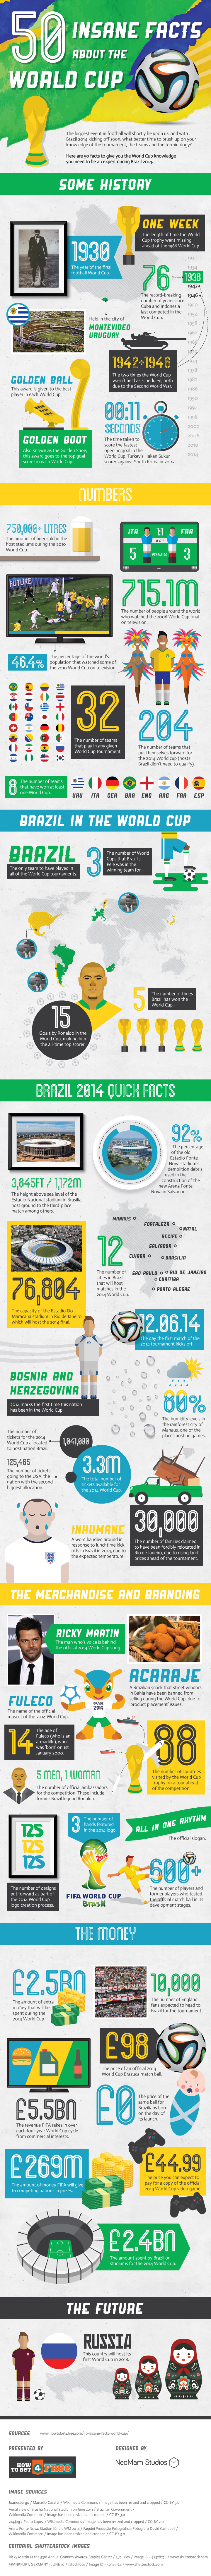 50 Insane Facts About the World Cup